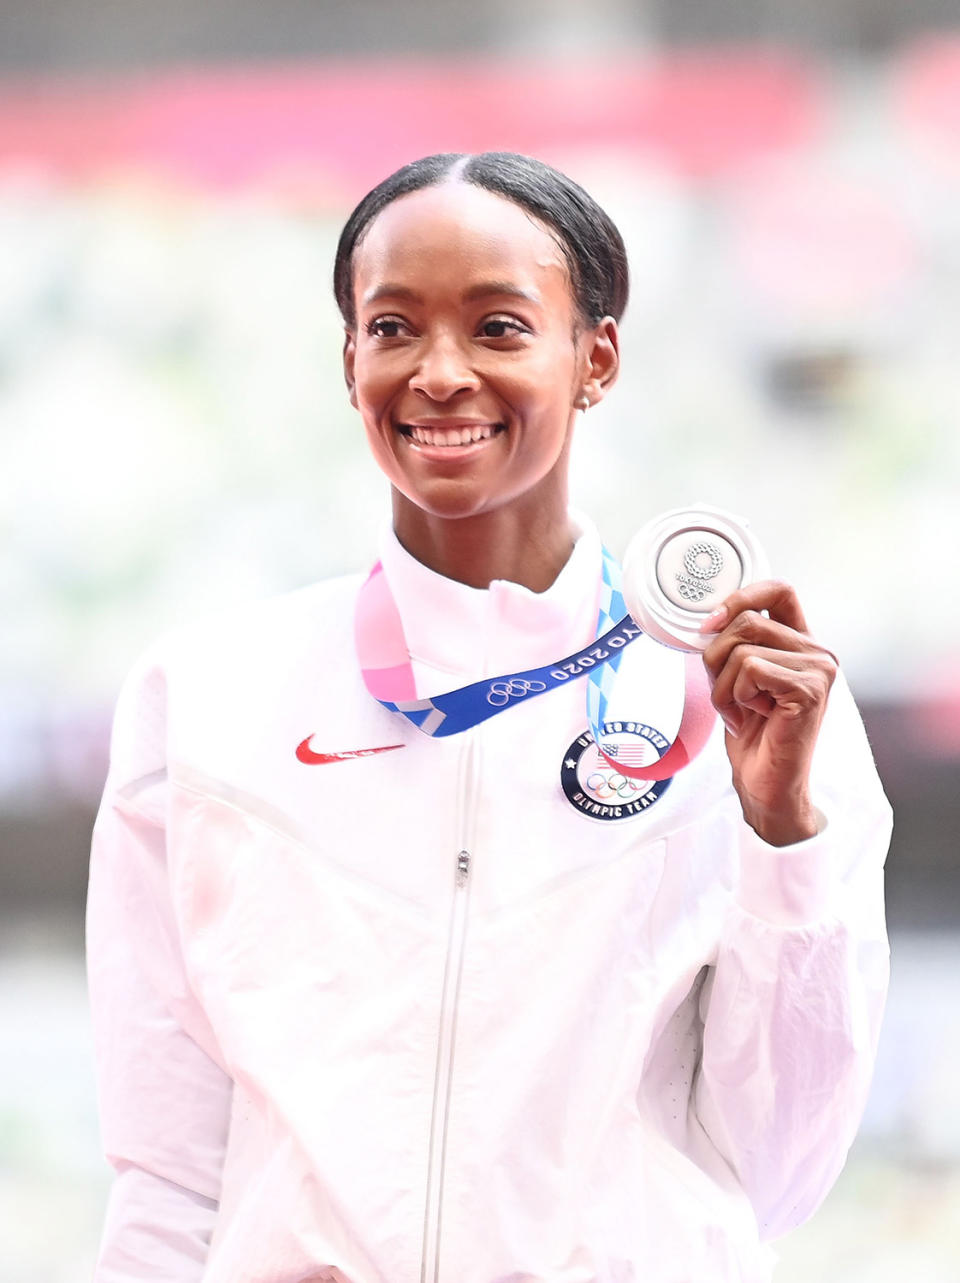 <p>Biography: 21 years old</p> <p>Event: Women's 400m hurdles</p> <p>Quote: "I think we as a society need to separate all of the accomplishments that are made and be happy with the accomplishments that you make within yourself. To be sitting here, 1-2-3 with crazy fast times, it's an accomplishment in itself. I'm truly proud of that."</p>